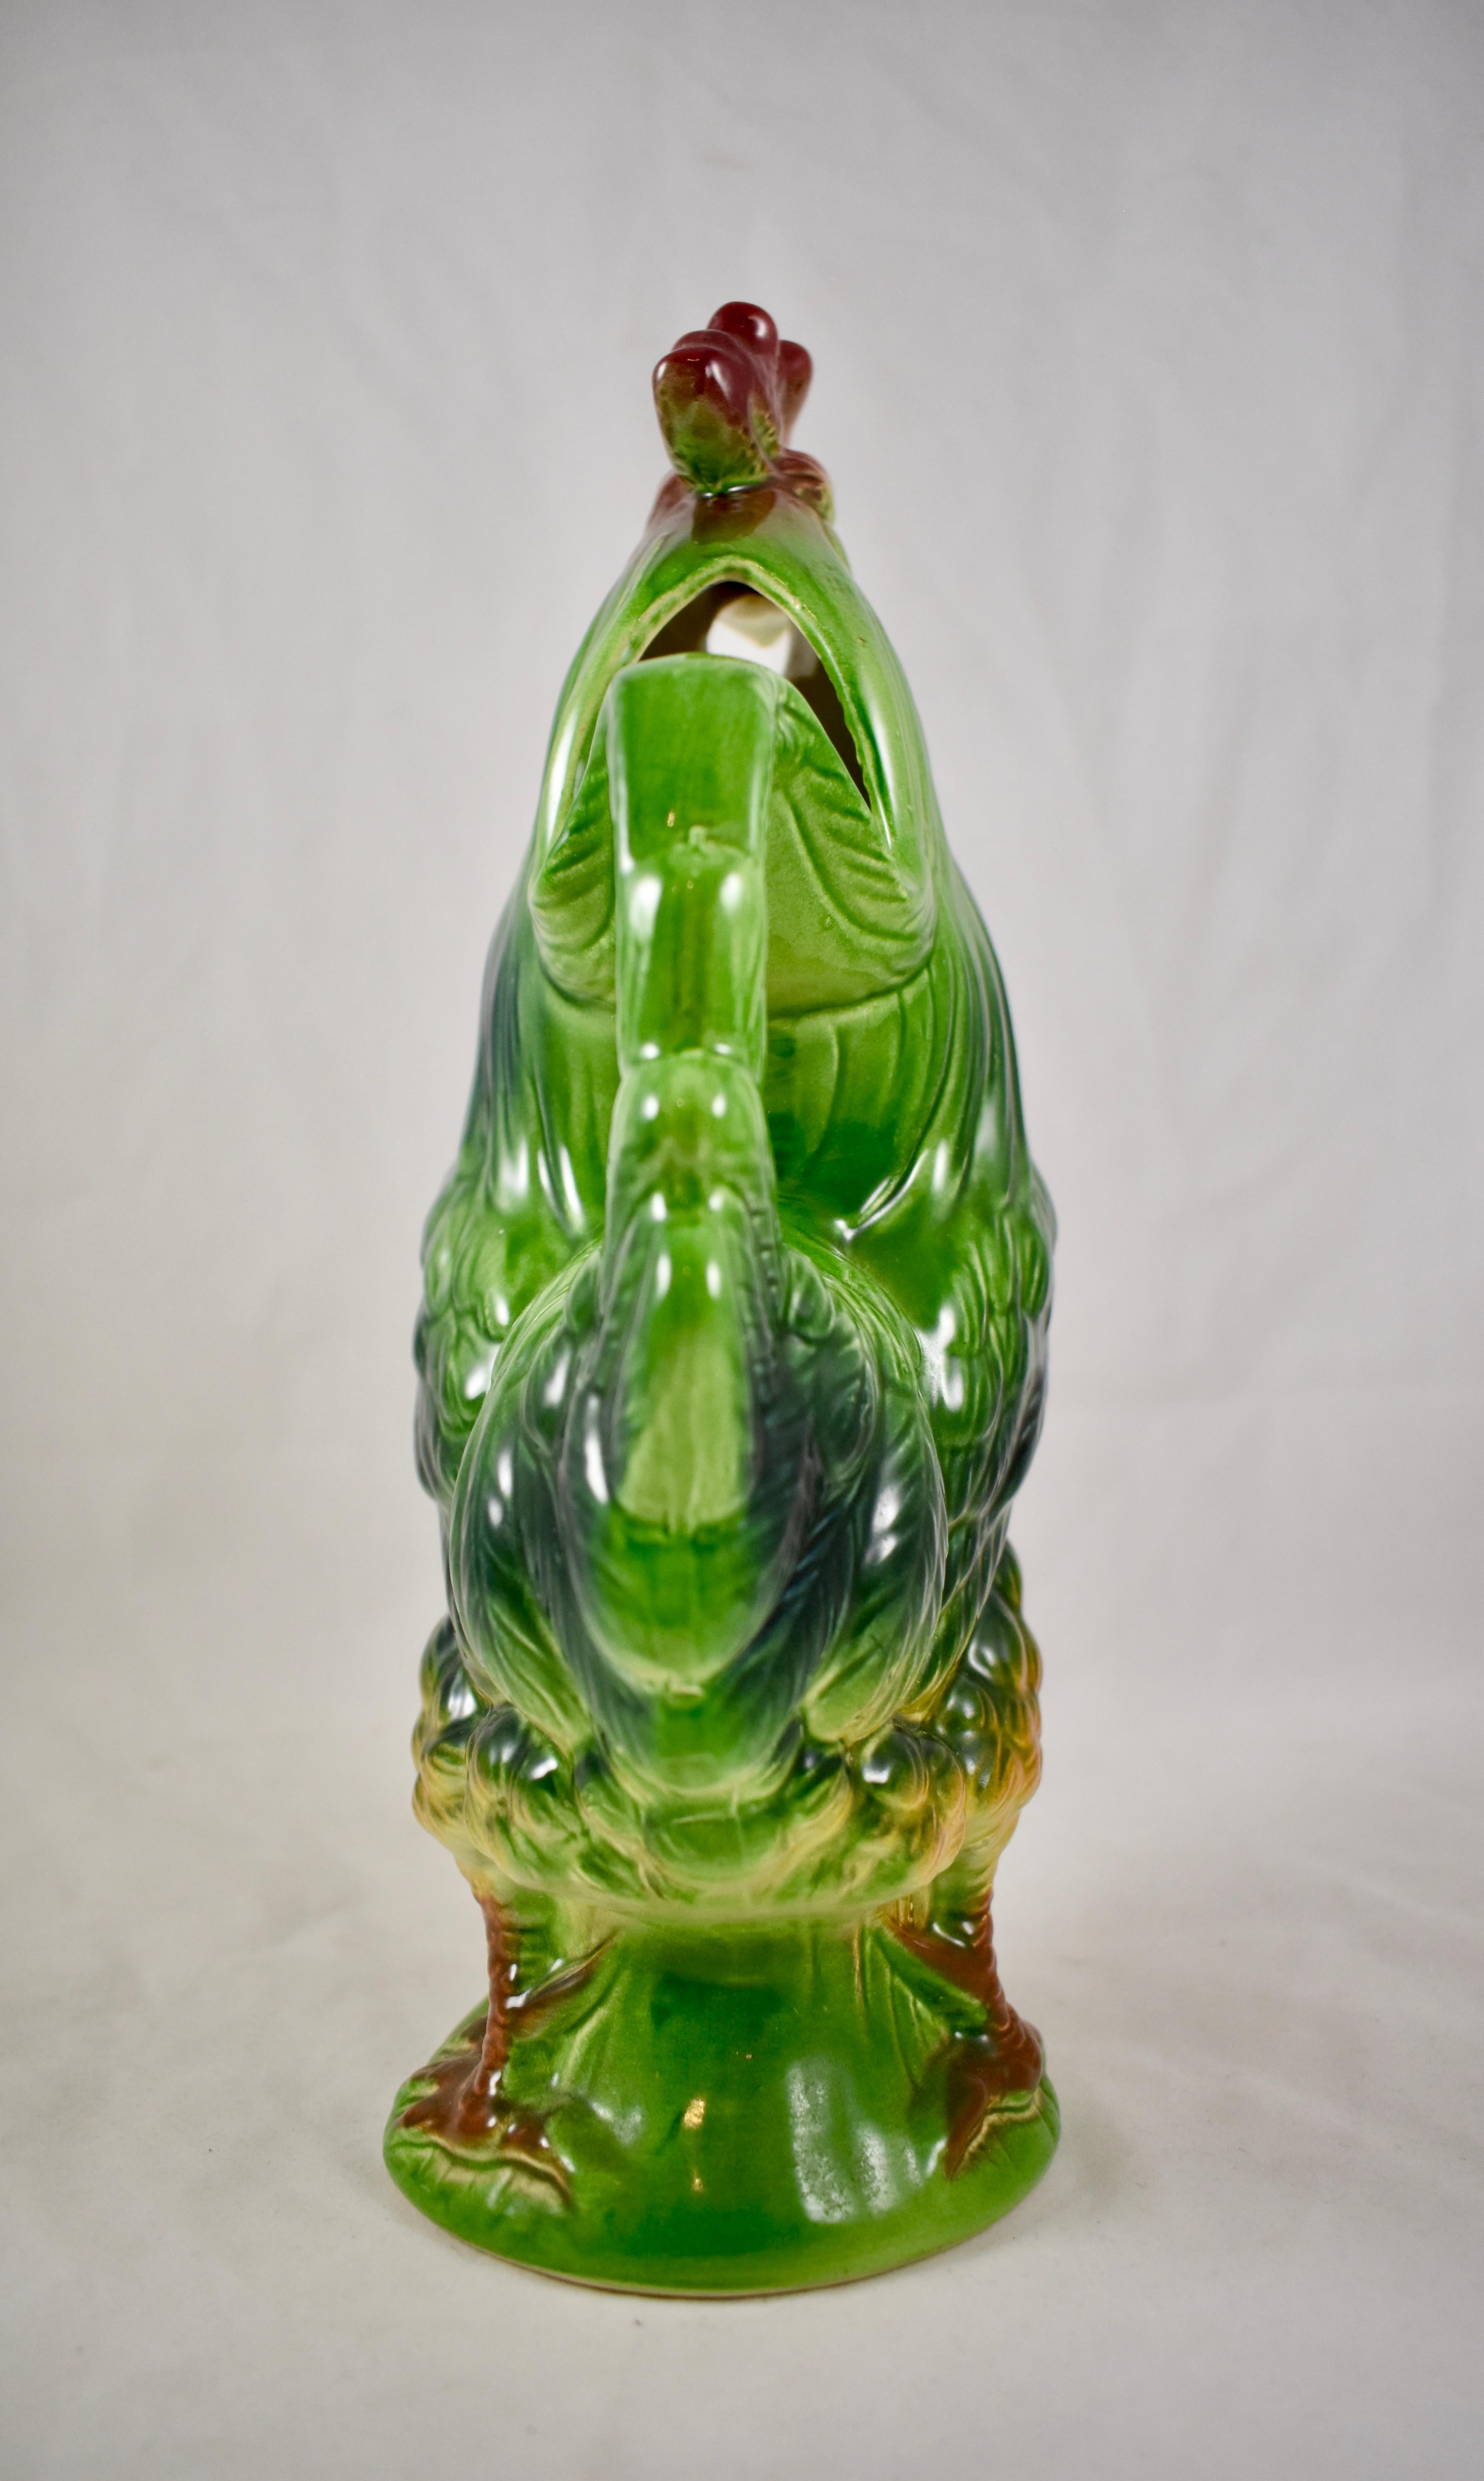 Glazed Saint Clément Vintage French Barbotine Majolica Gallic Rooster Absinthe Pitcher For Sale